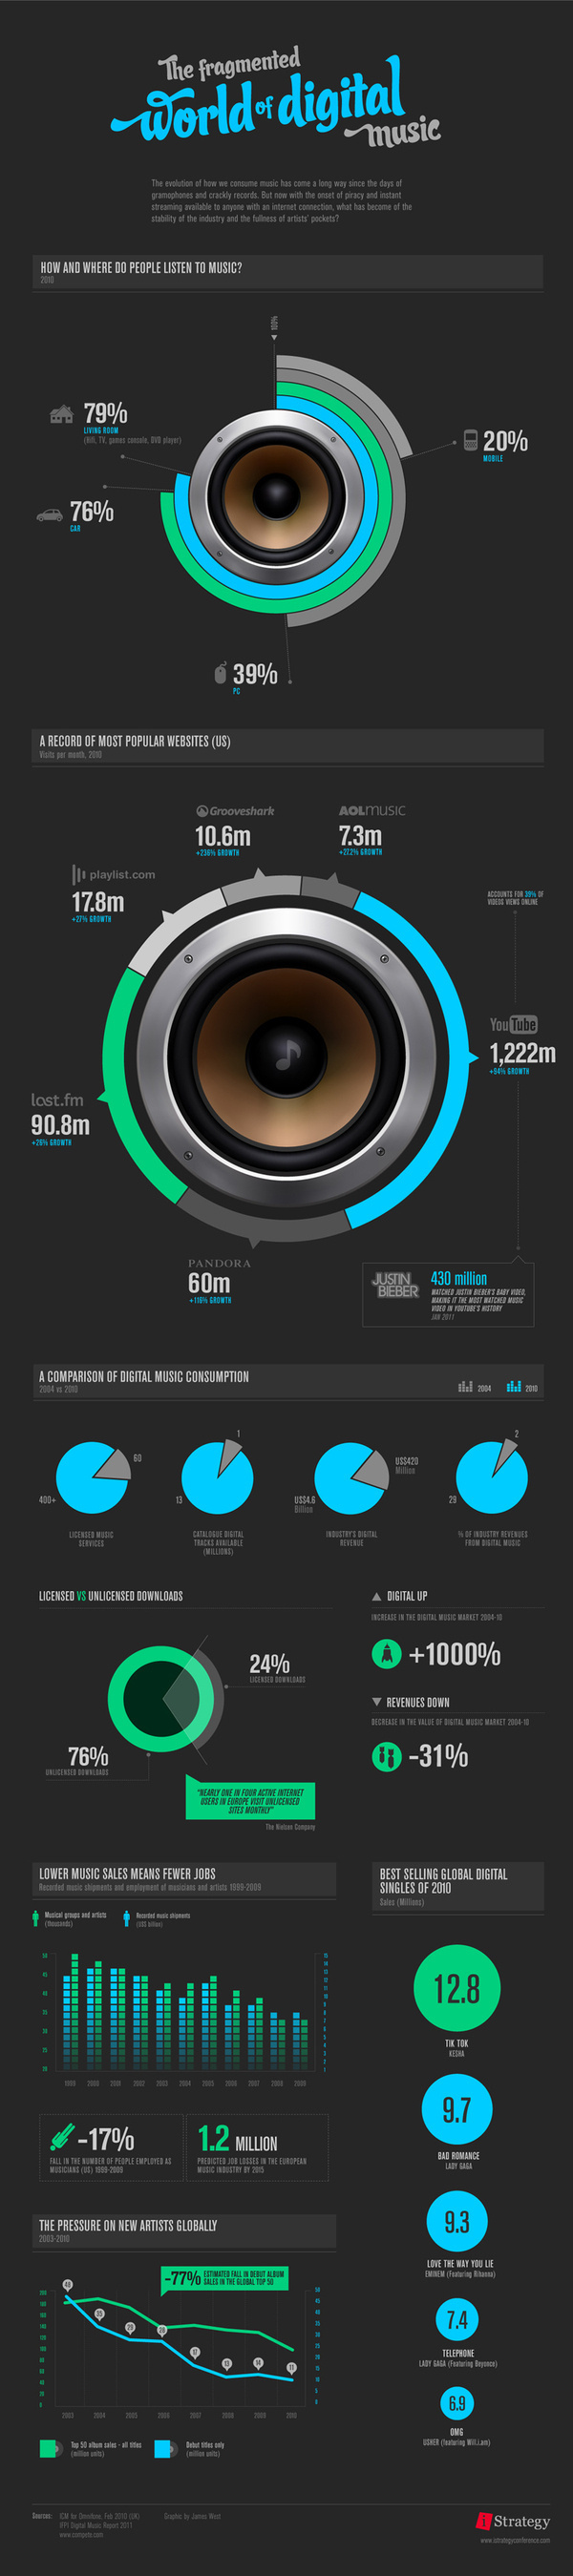 Infographic design idea #342: The Fragmented World of Digital Music - INFOGRAPHIC #music #digital #infographic